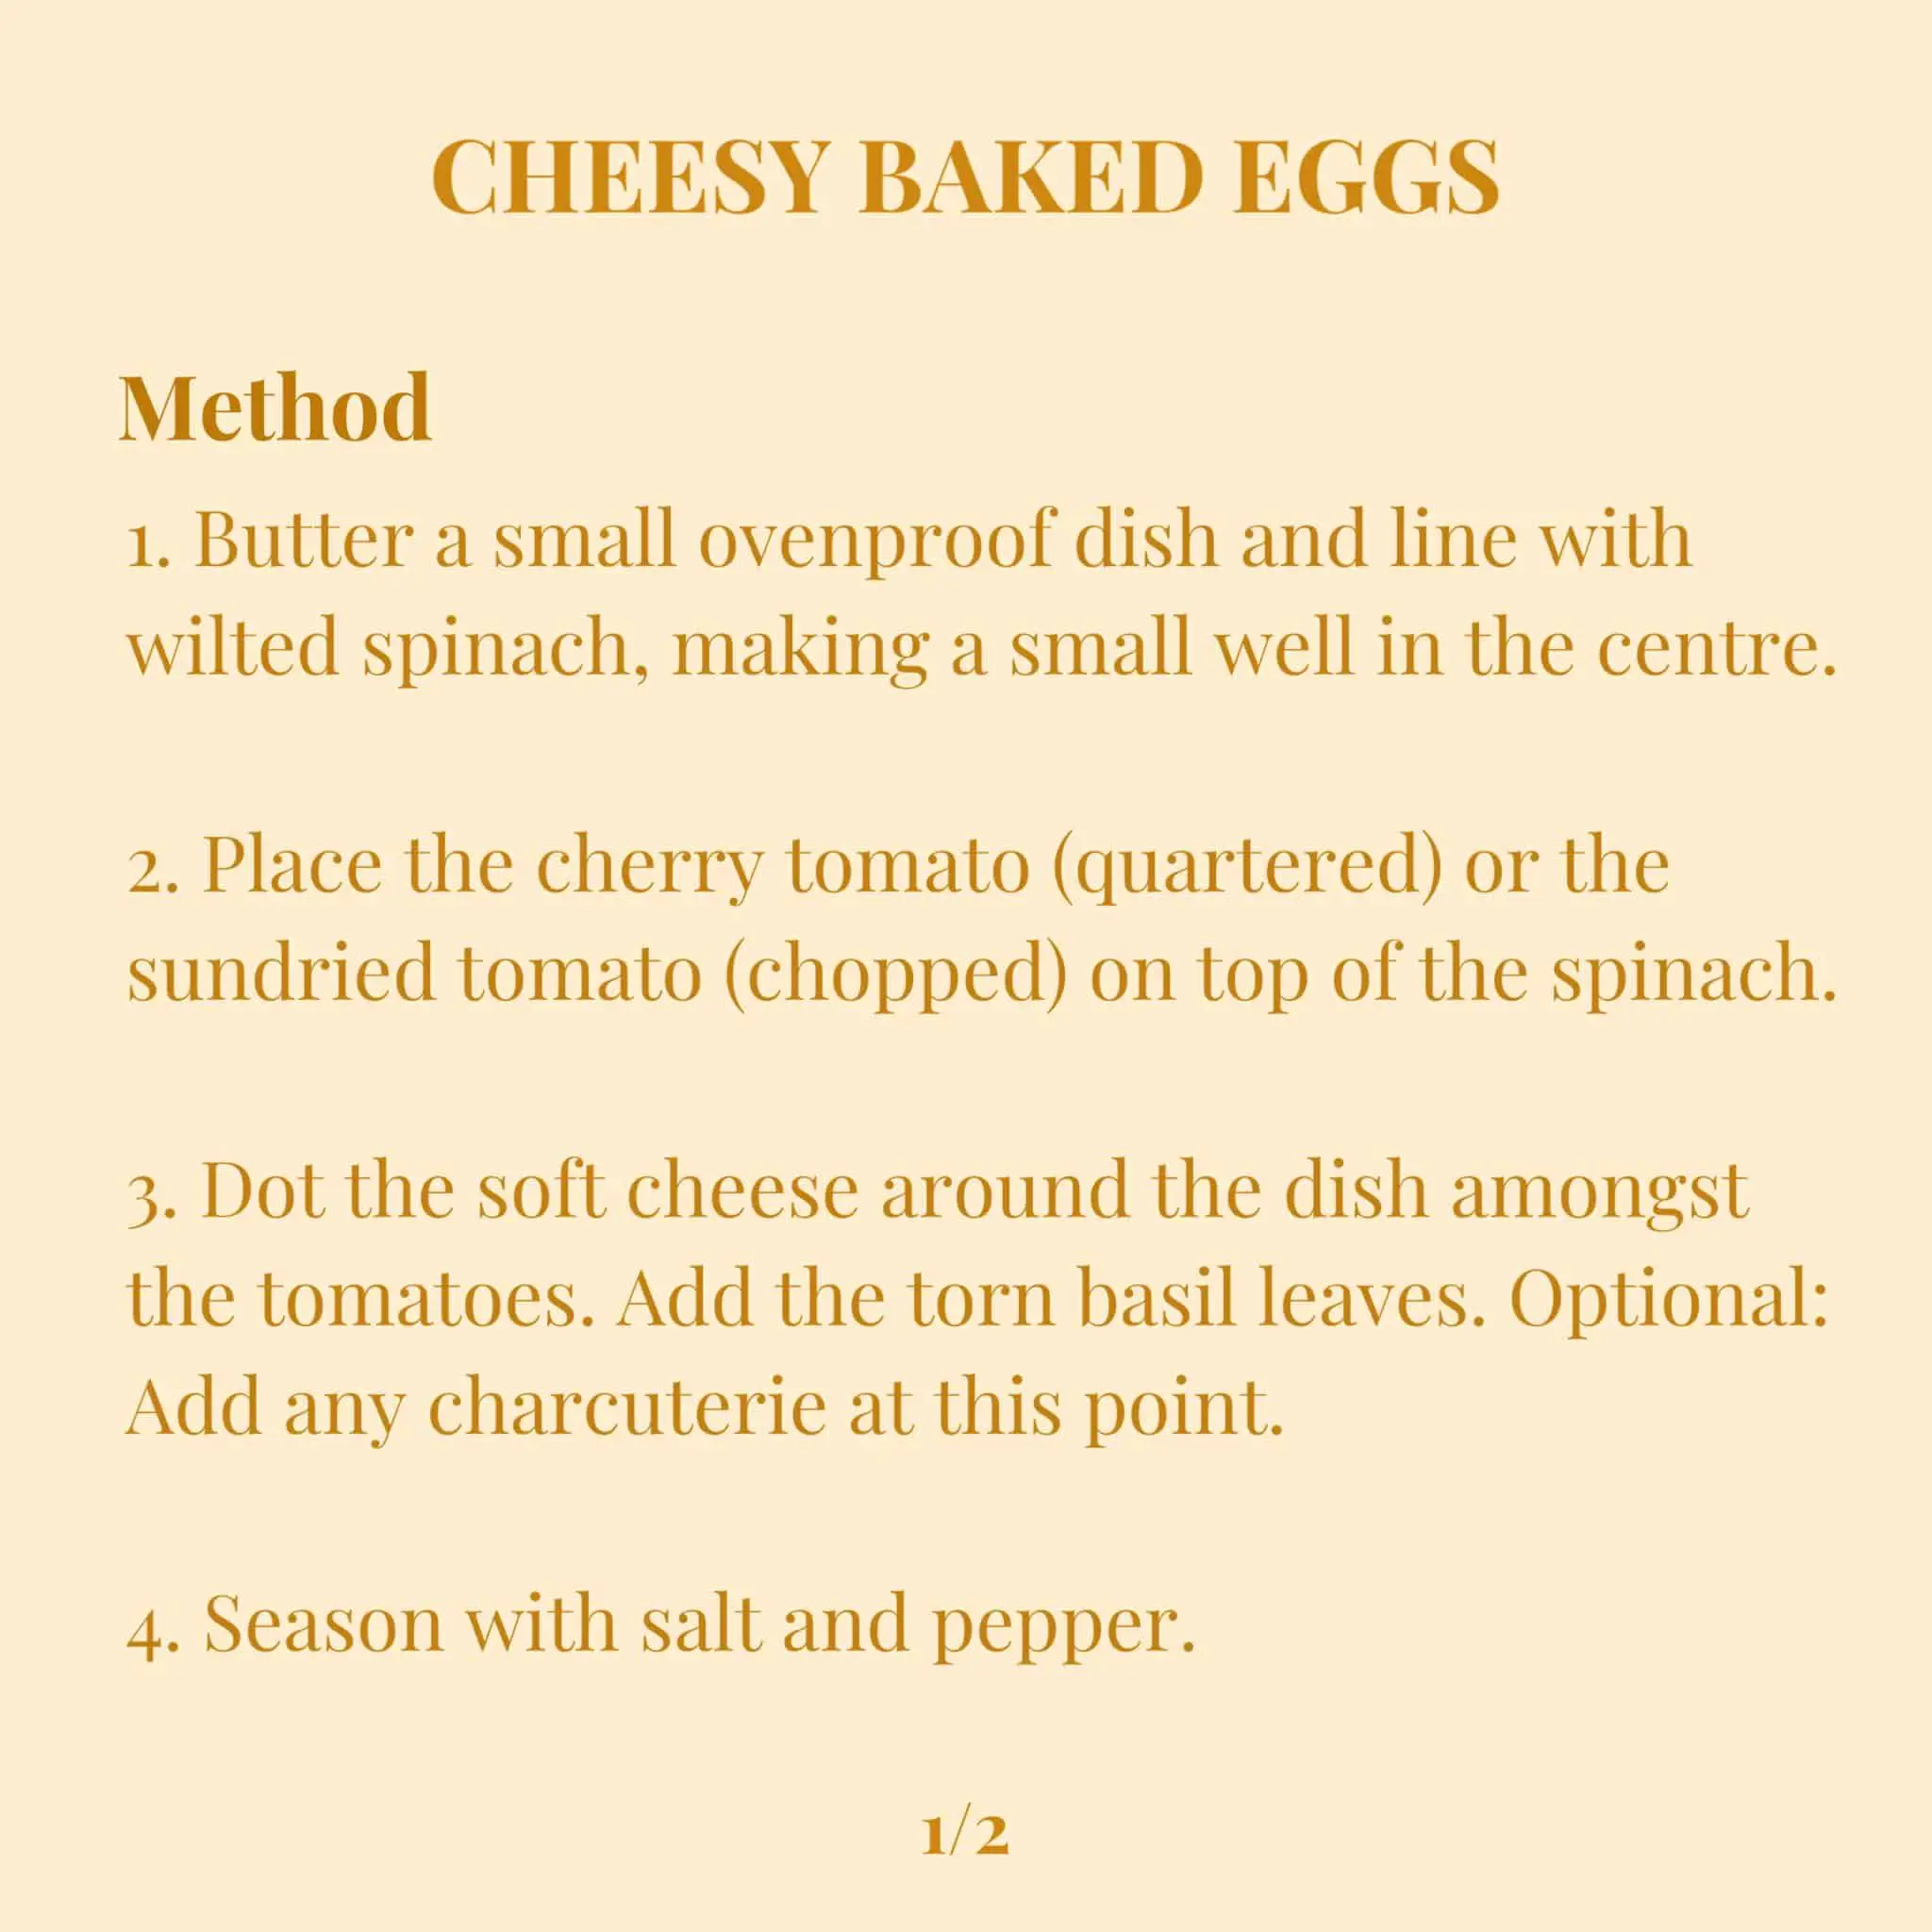 Prince Charles of Wales shared the recipe of Cheesy Baked Eggs Method